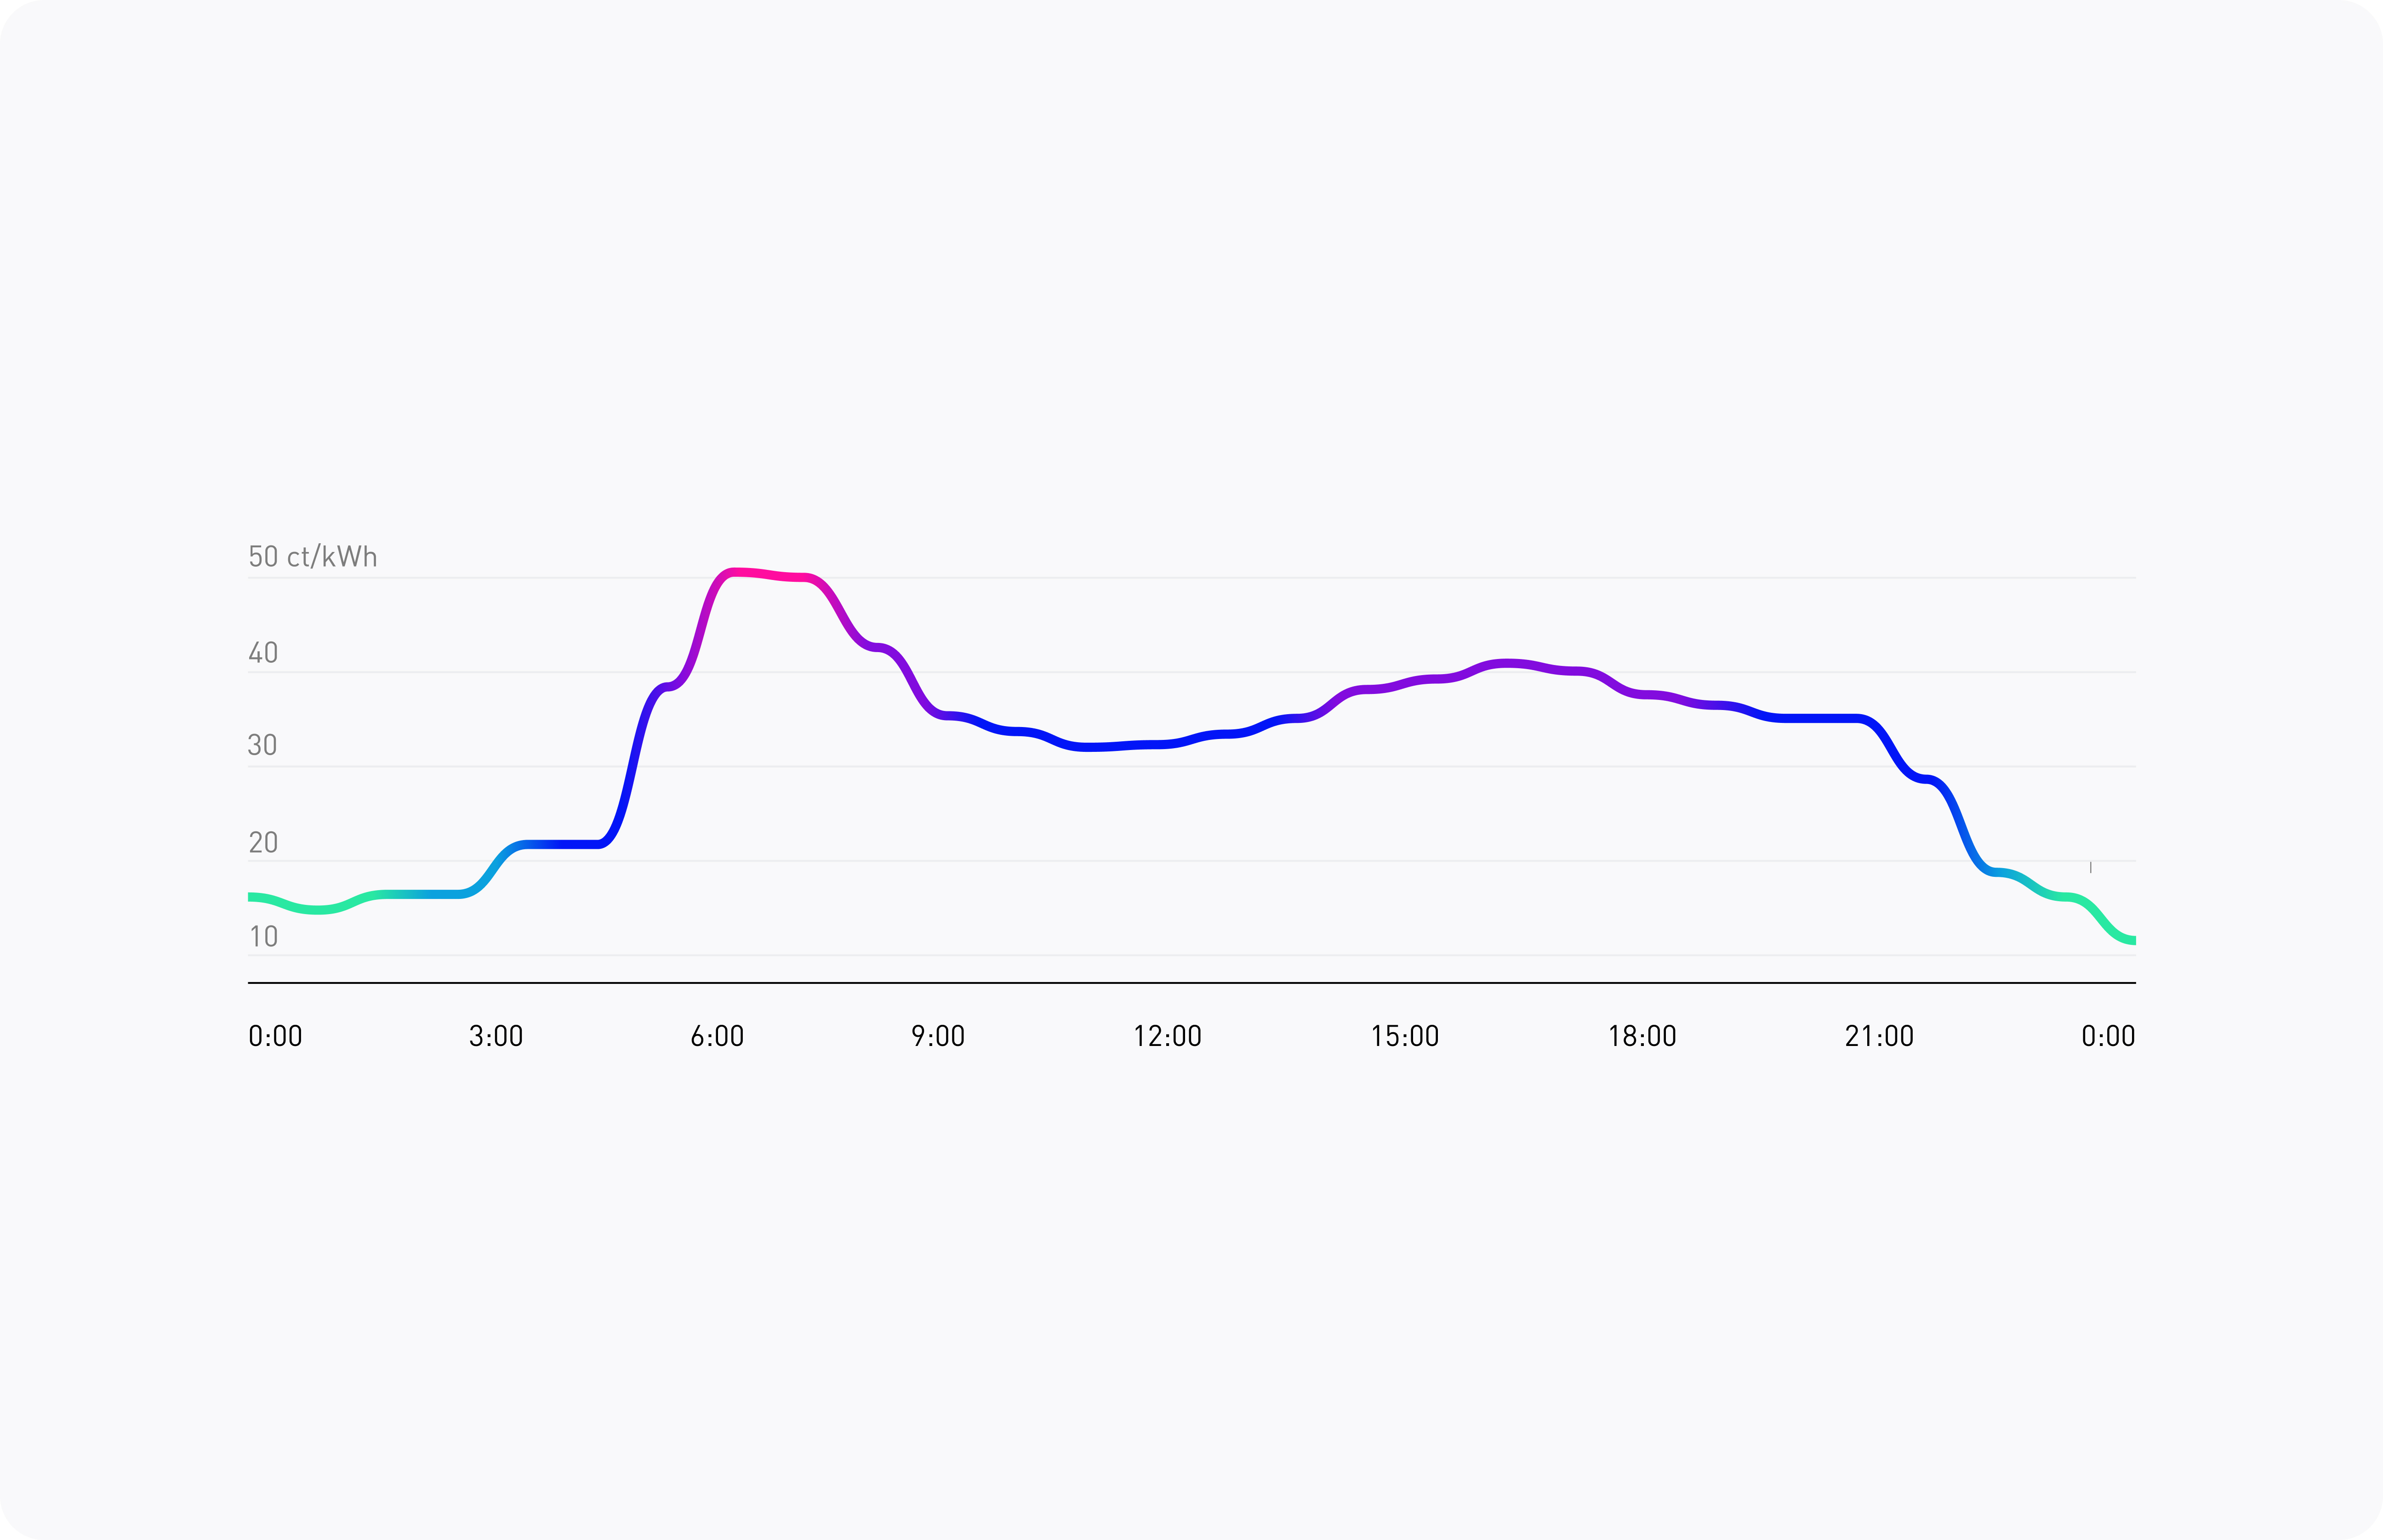 Graph showing electricity prices over the day